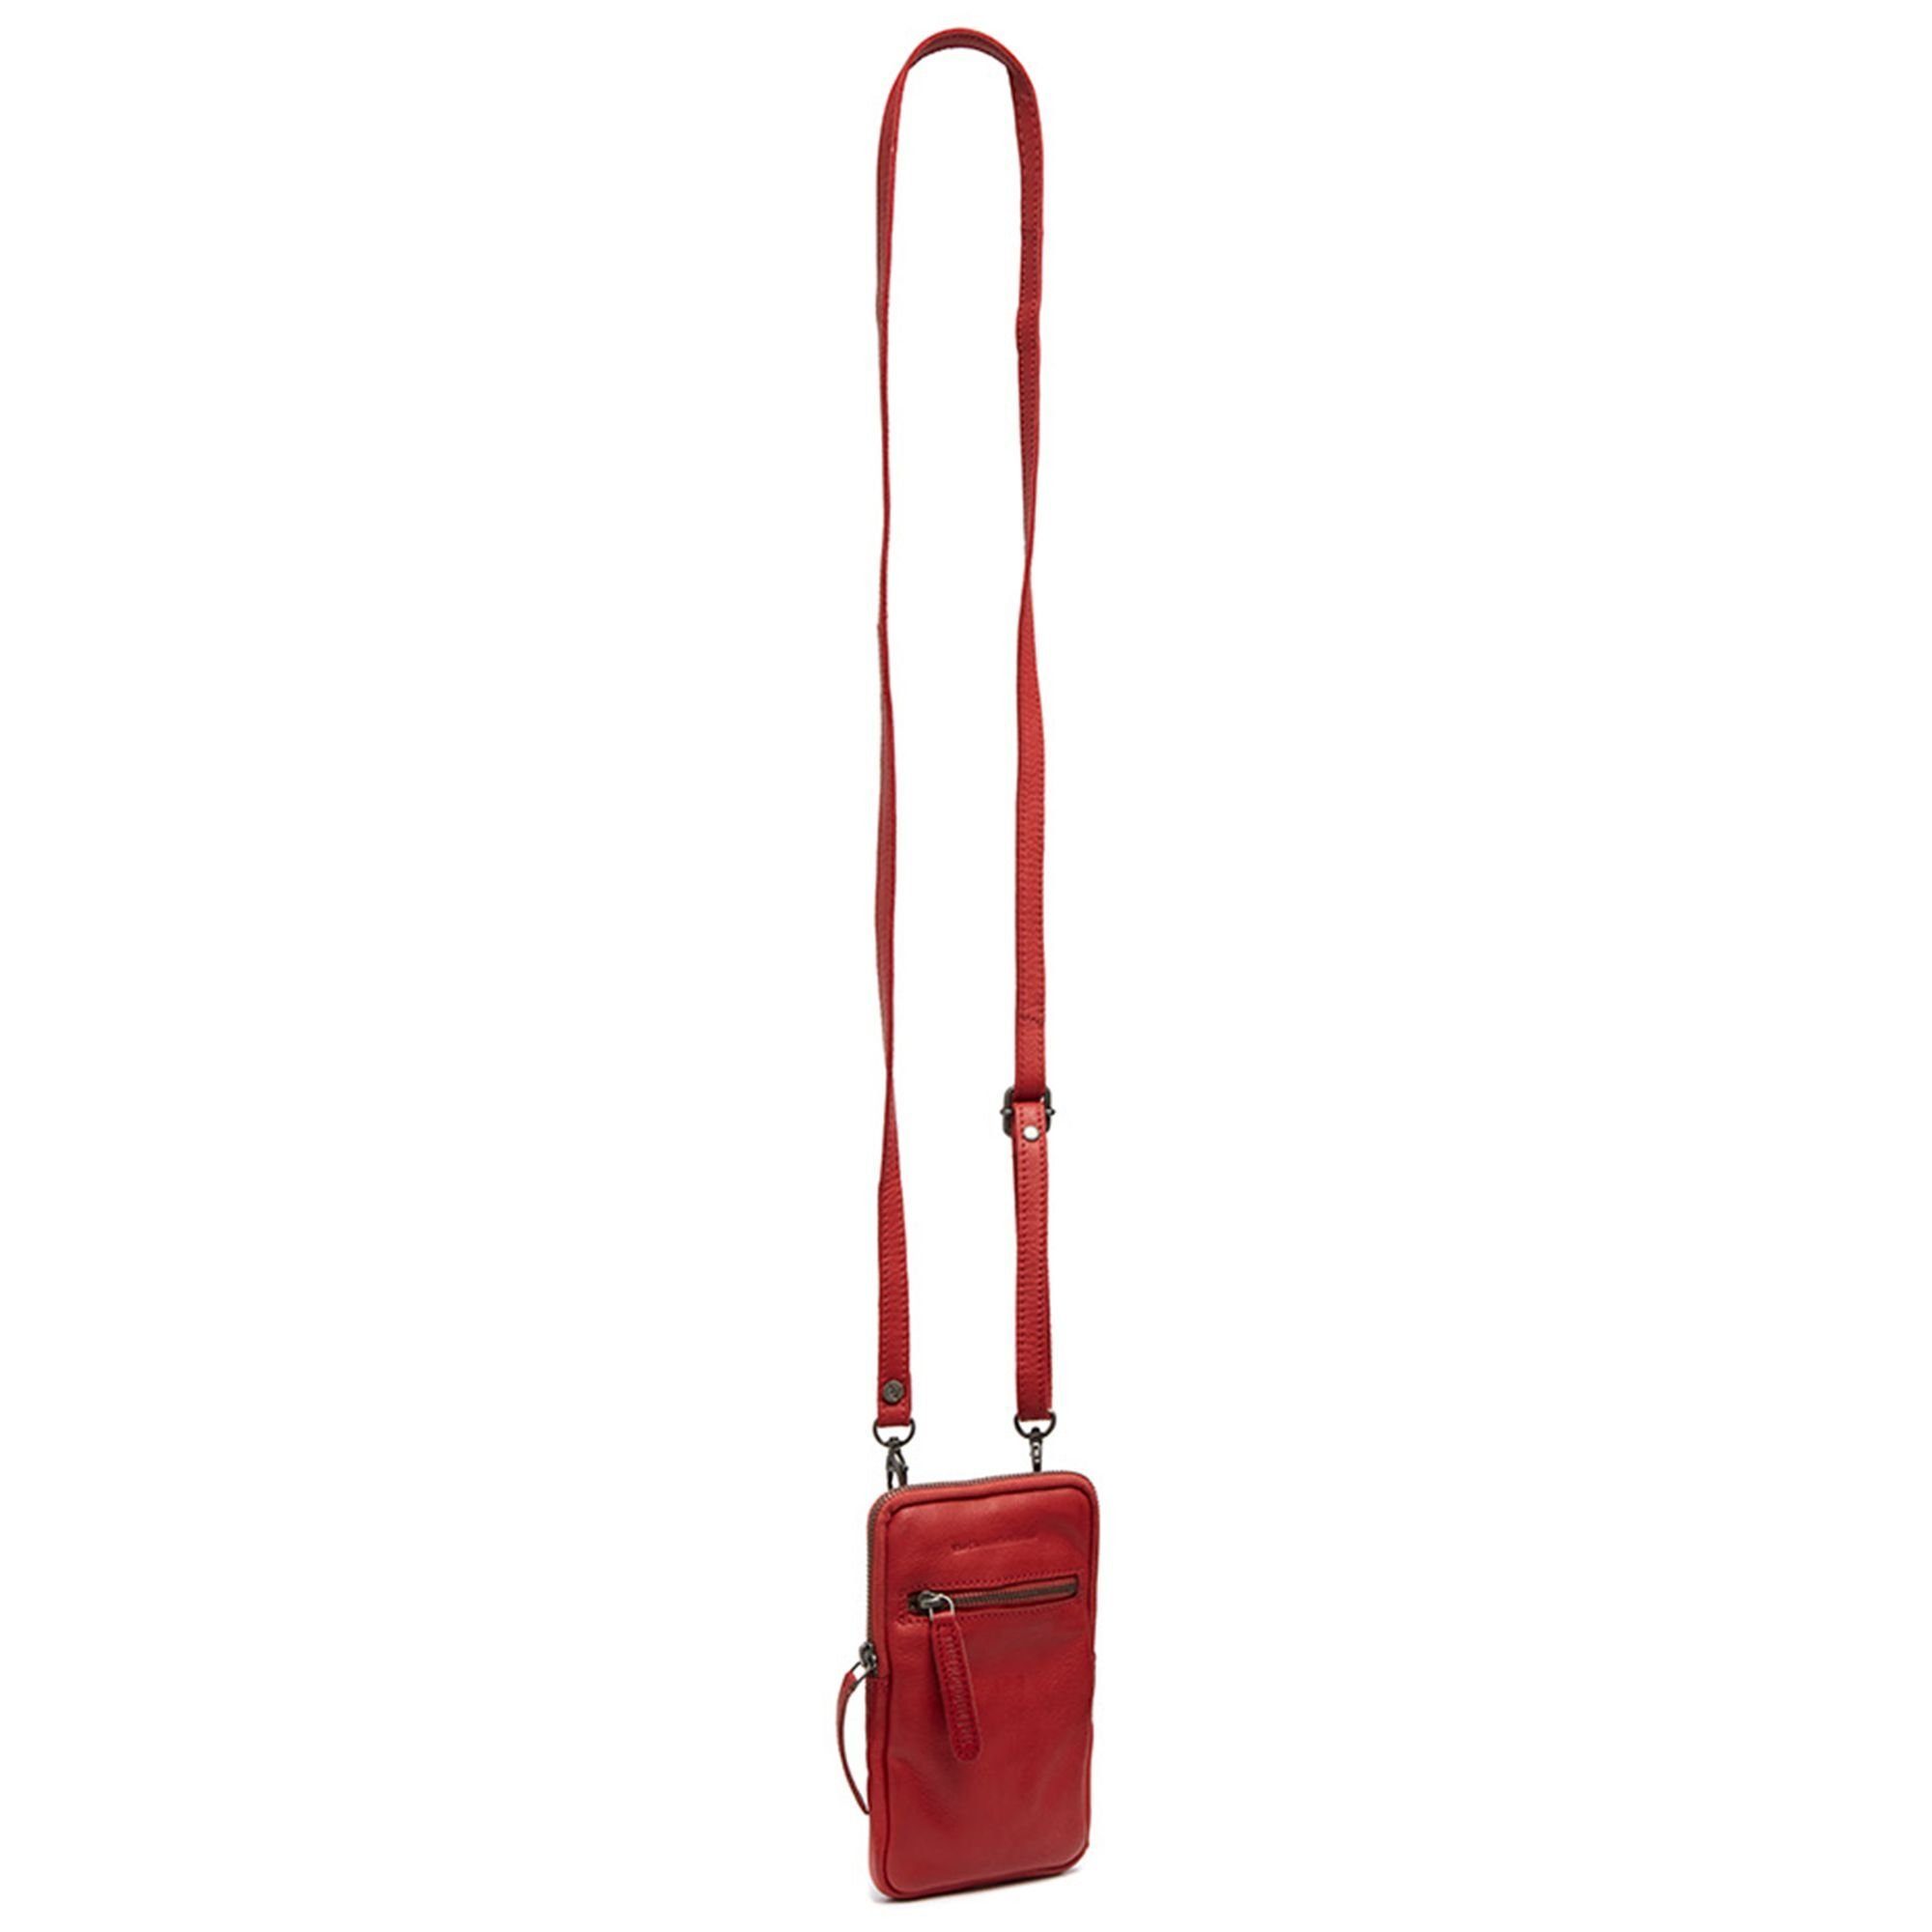 The Leder Smartphone-Hülle, Brand Chesterfield red